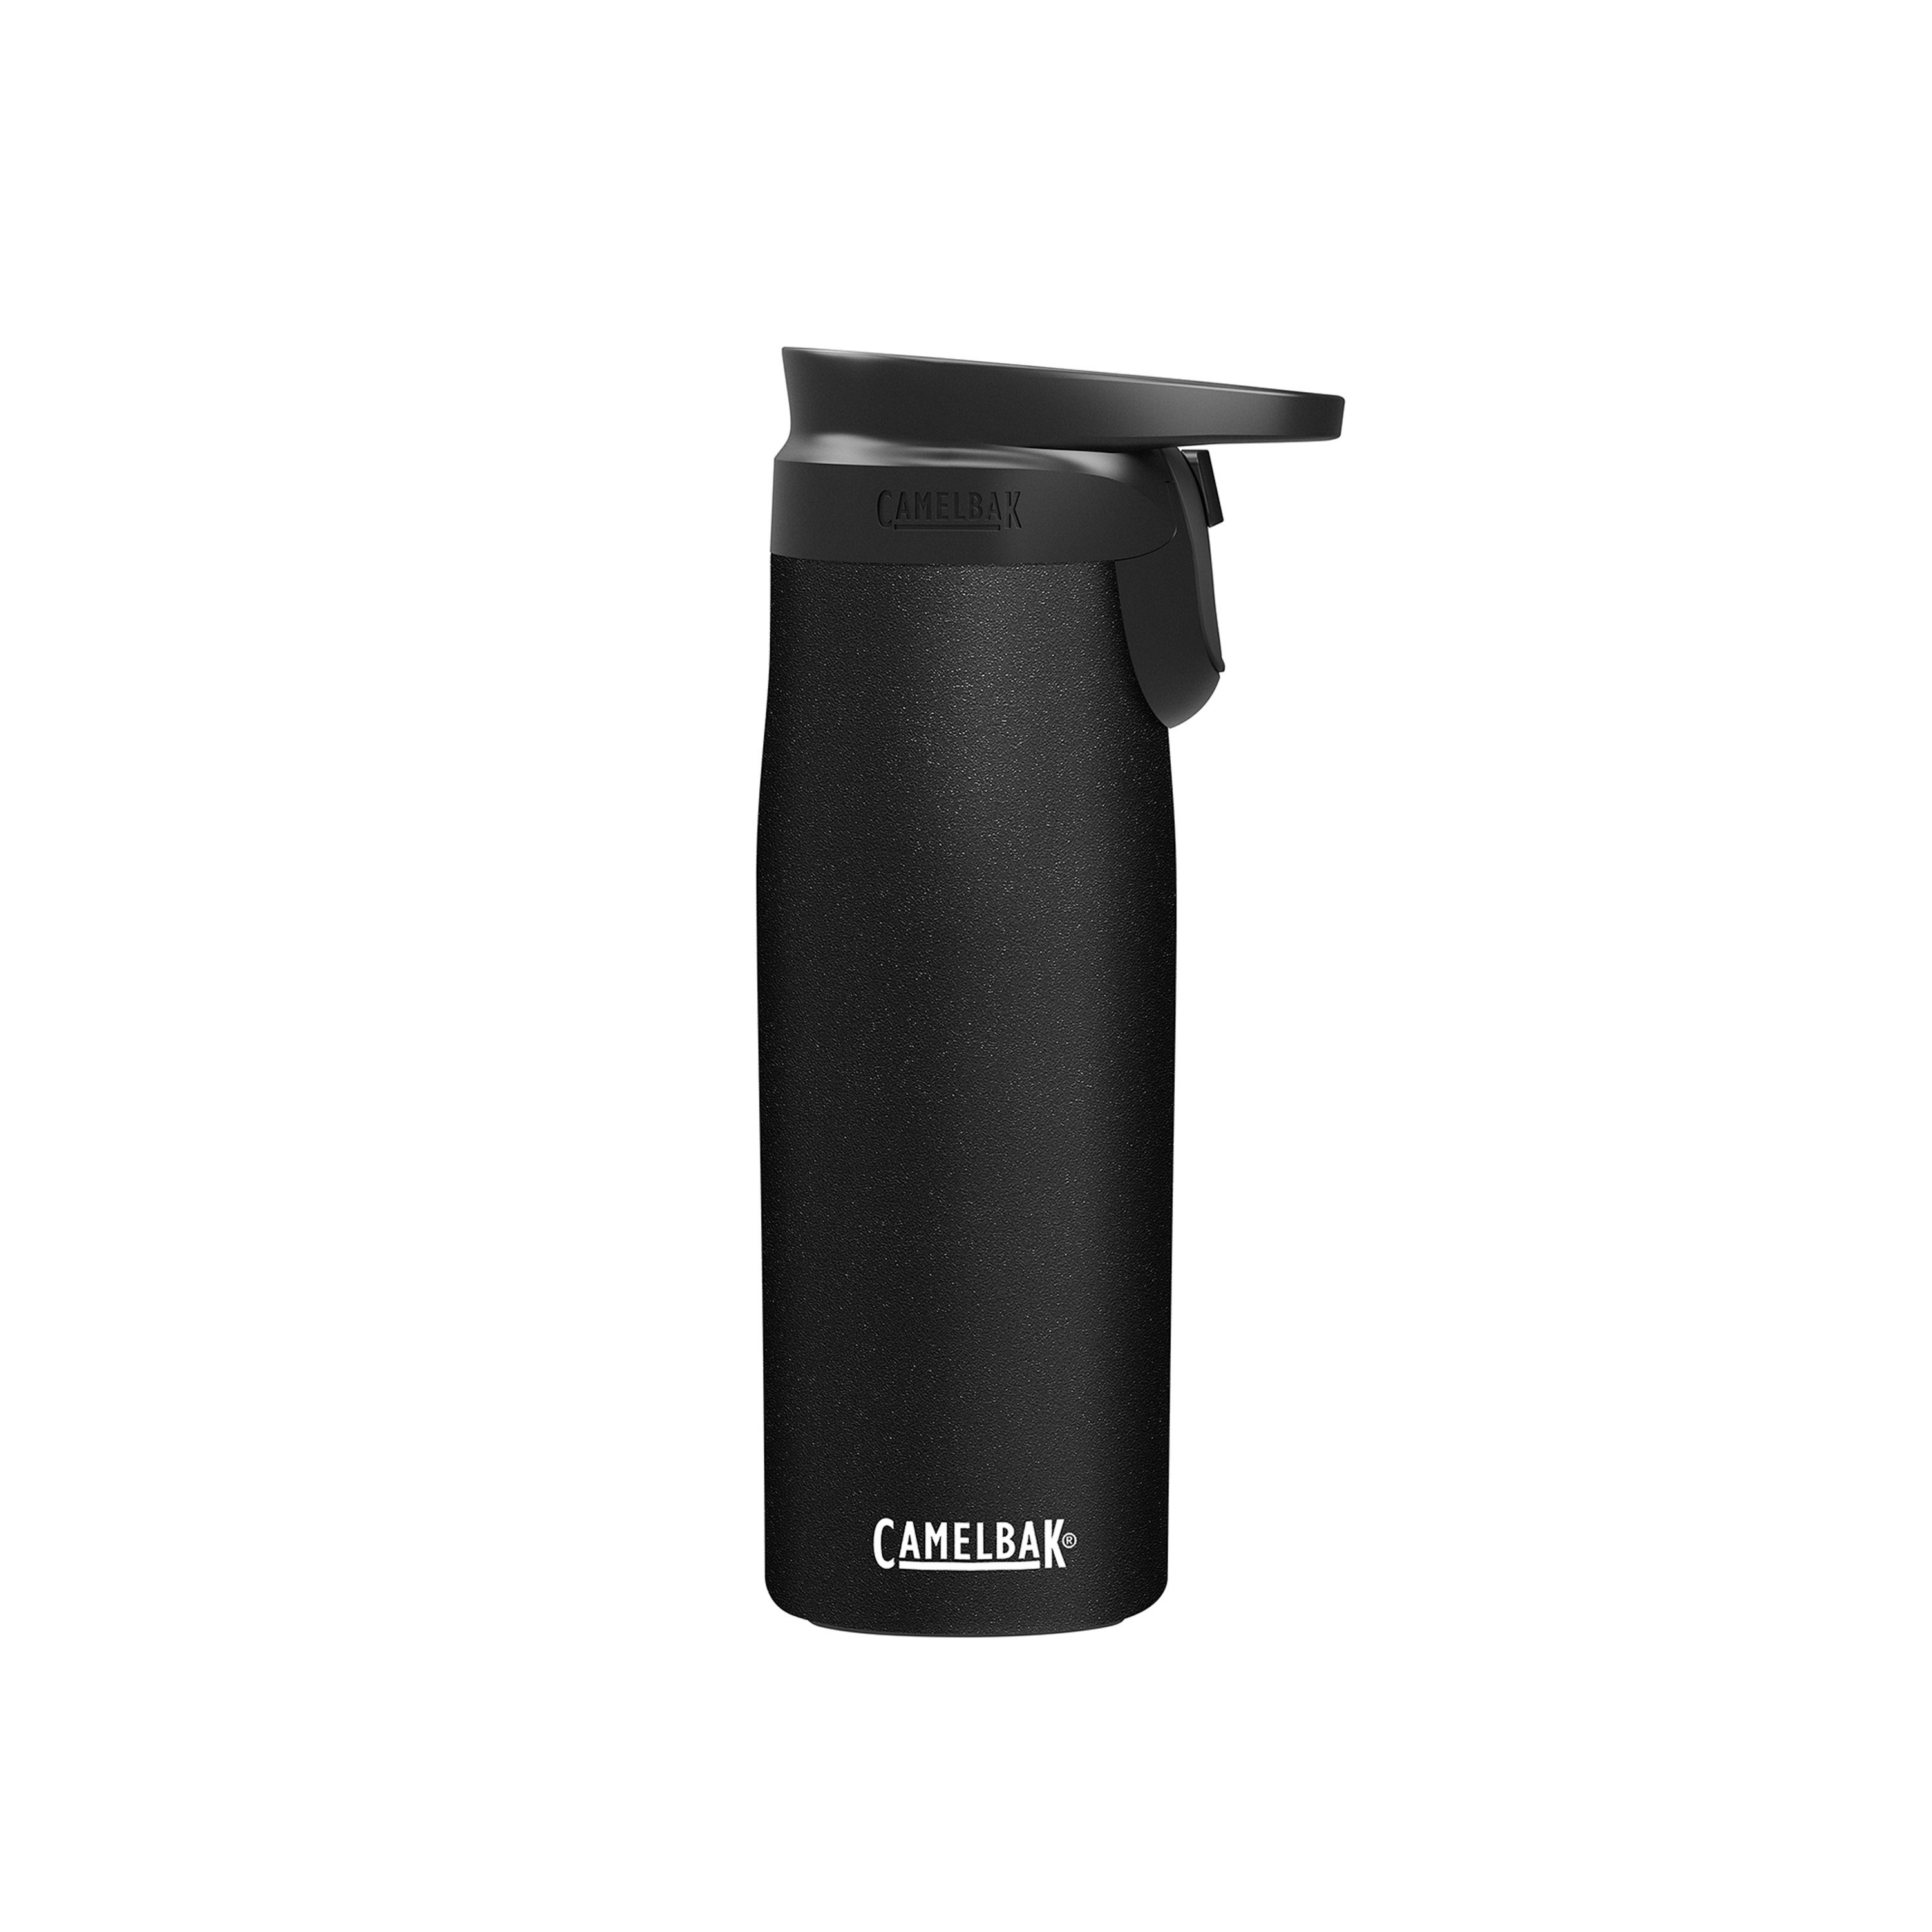 Forge Flow 20oz Insulated Stainless Steel Travel Mug Black